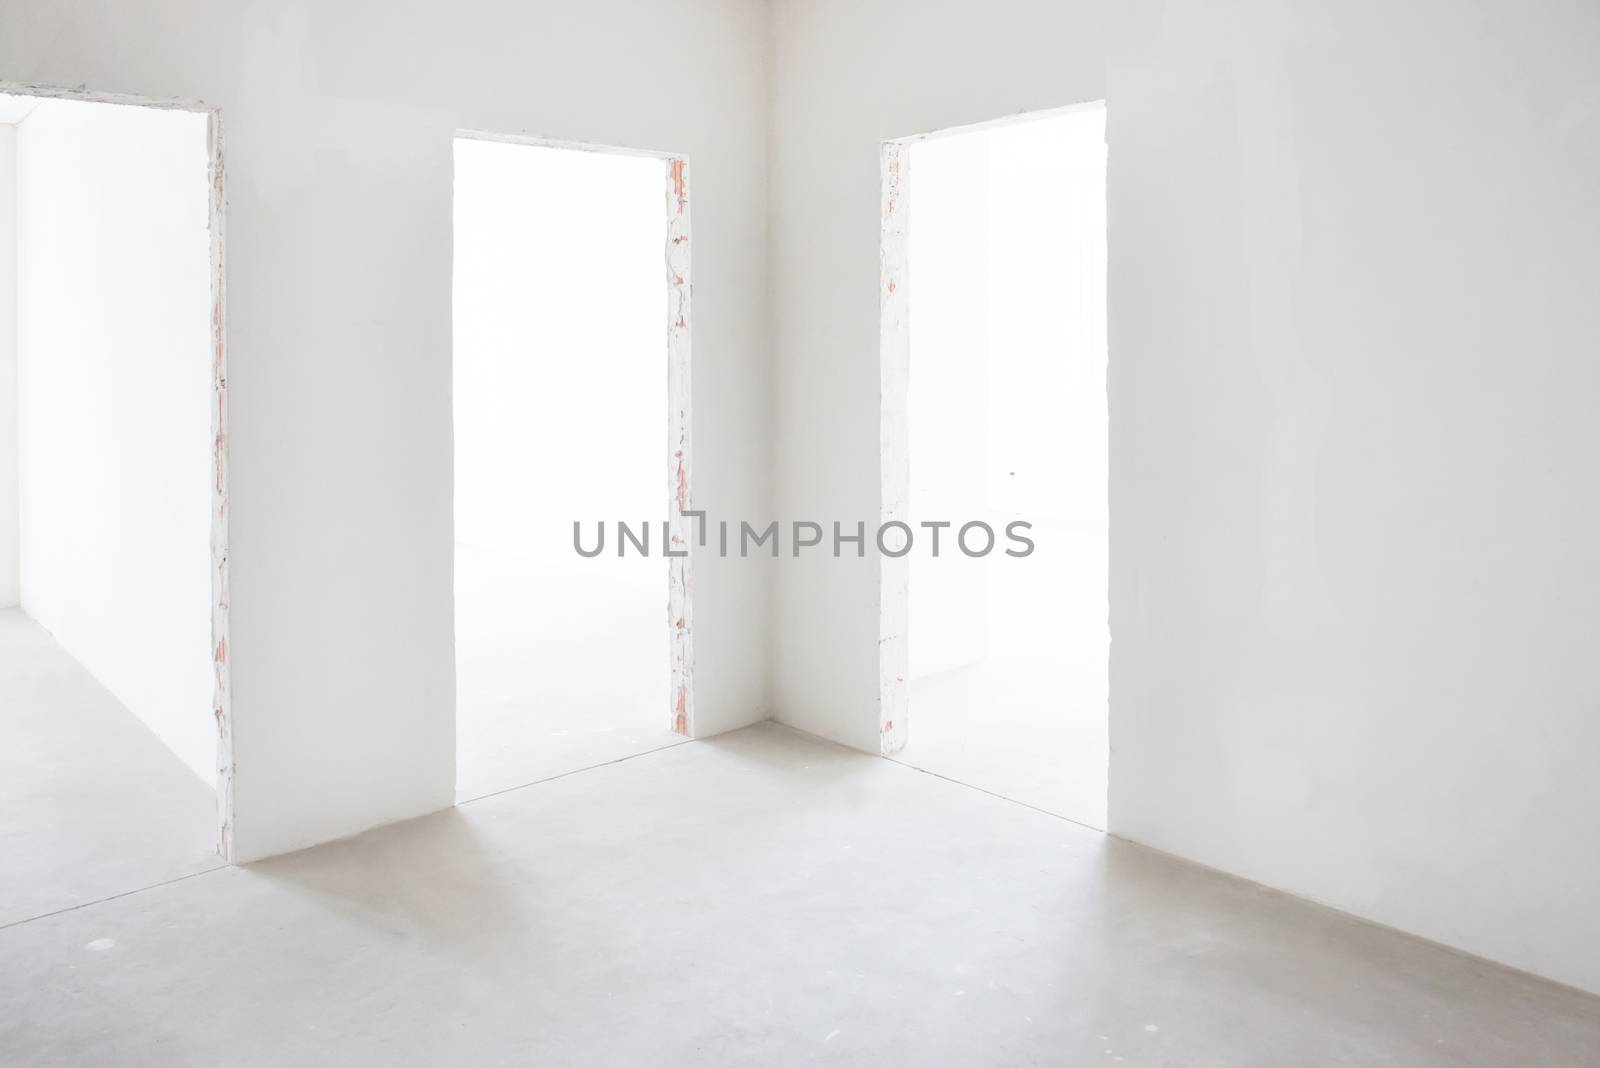 White room with entrance. Empty interior space